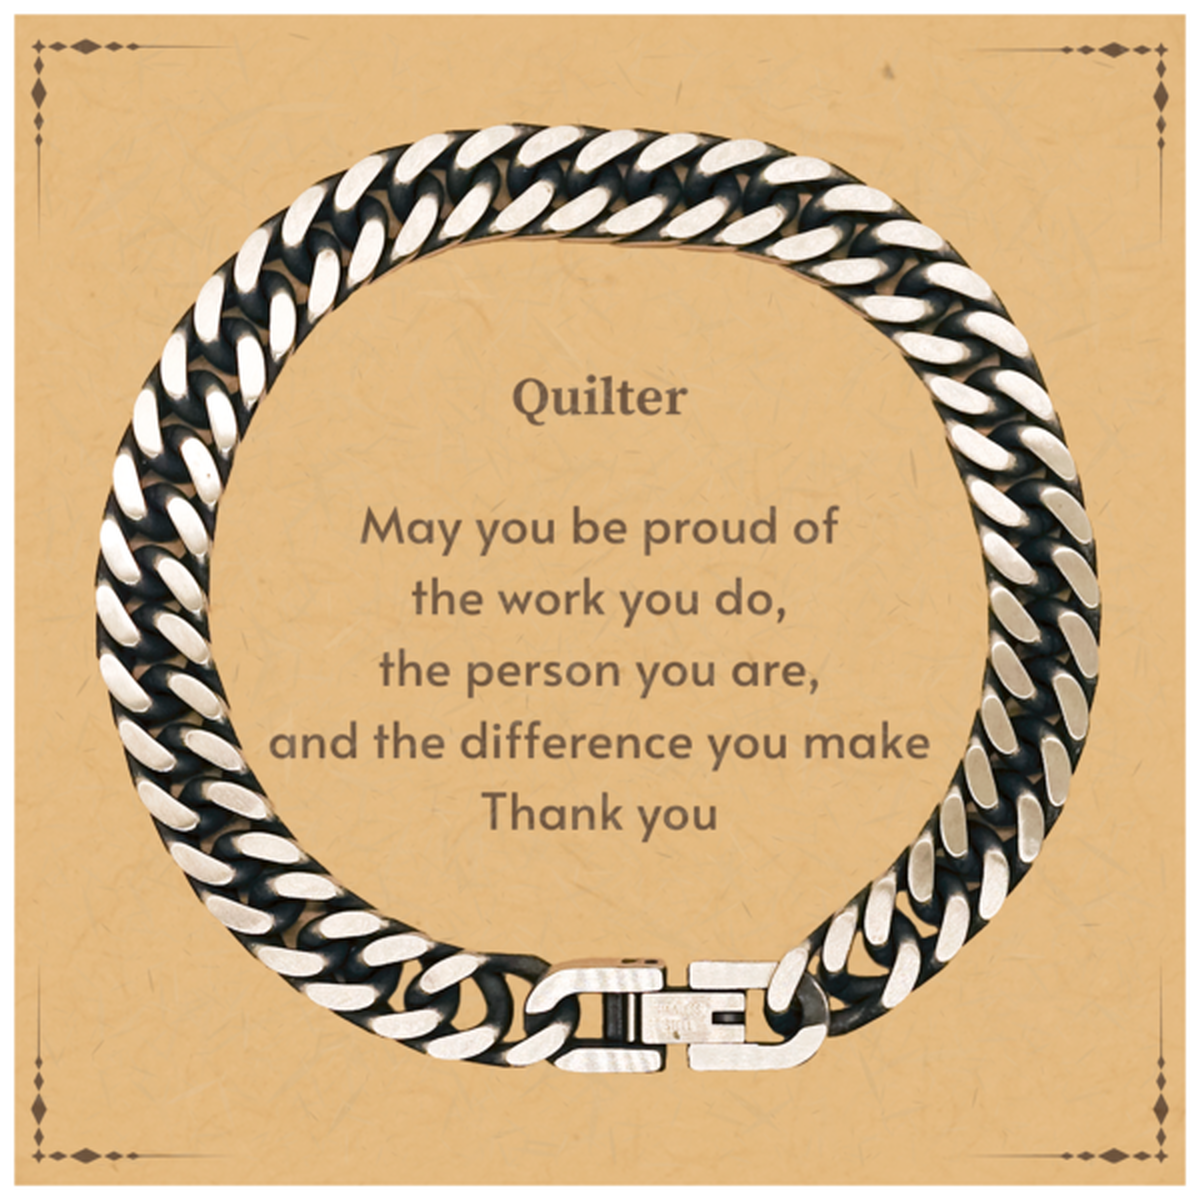 Heartwarming Cuban Link Chain Bracelet Retirement Coworkers Gifts for Quilter, Quilter May You be proud of the work you do, the person you are Gifts for Boss Men Women Friends